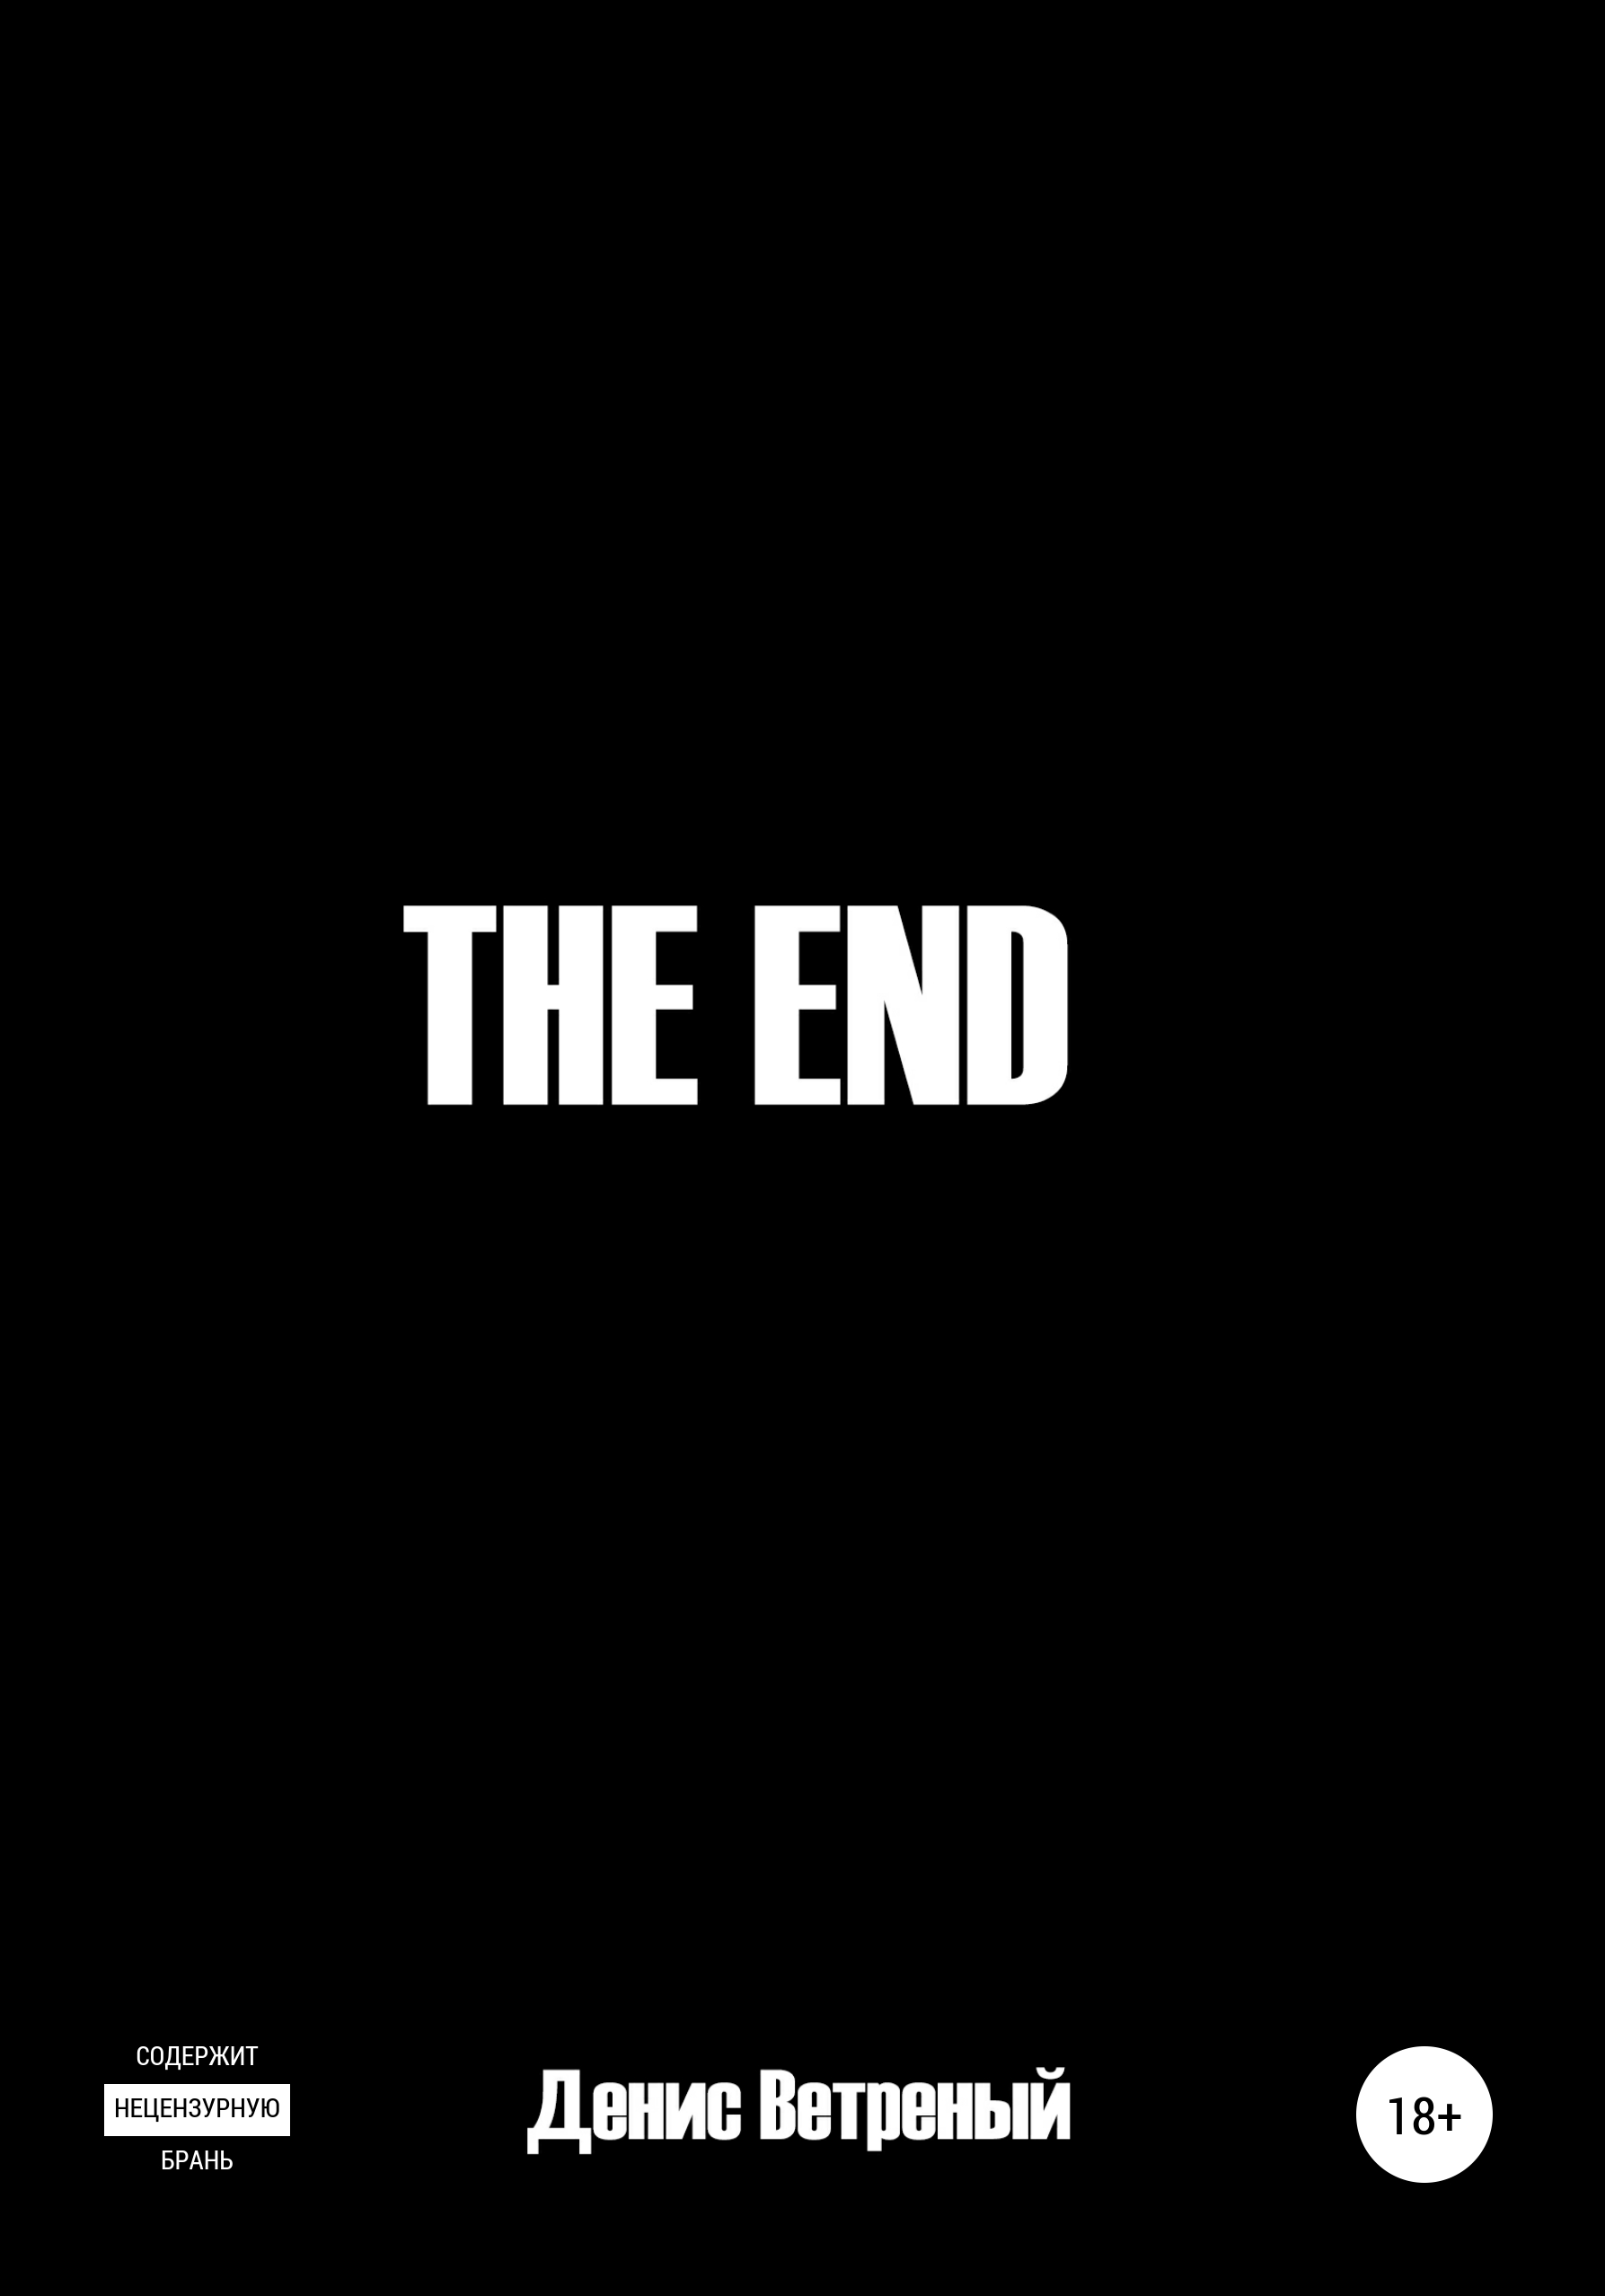 In the end на русском. The end. The end фото. EMD. En.